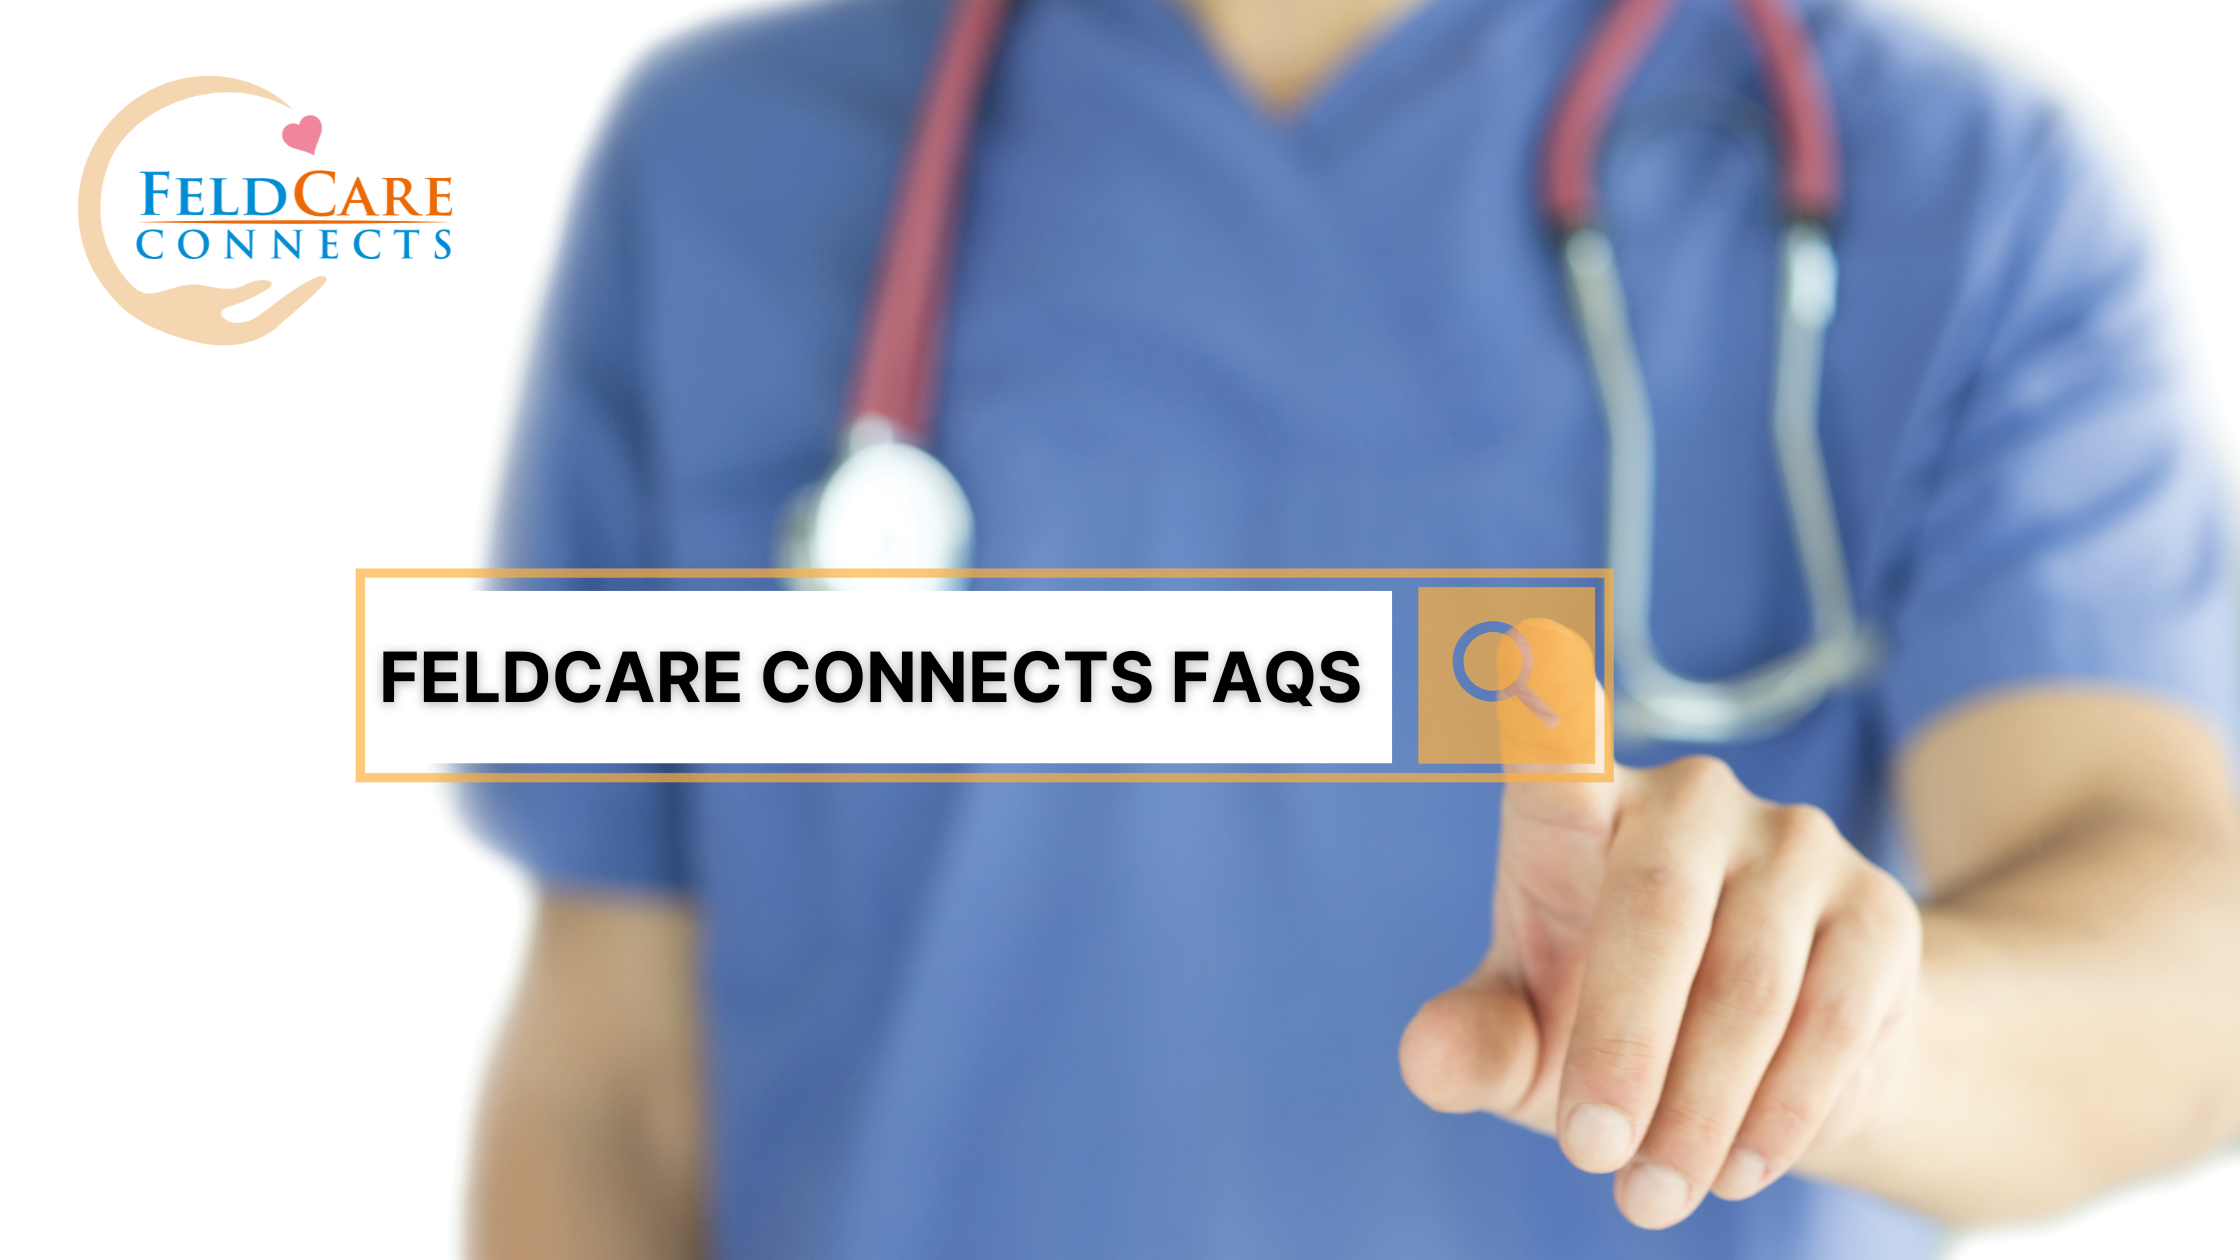 All About FeldCare: Answering Your Frequently Asked Questions